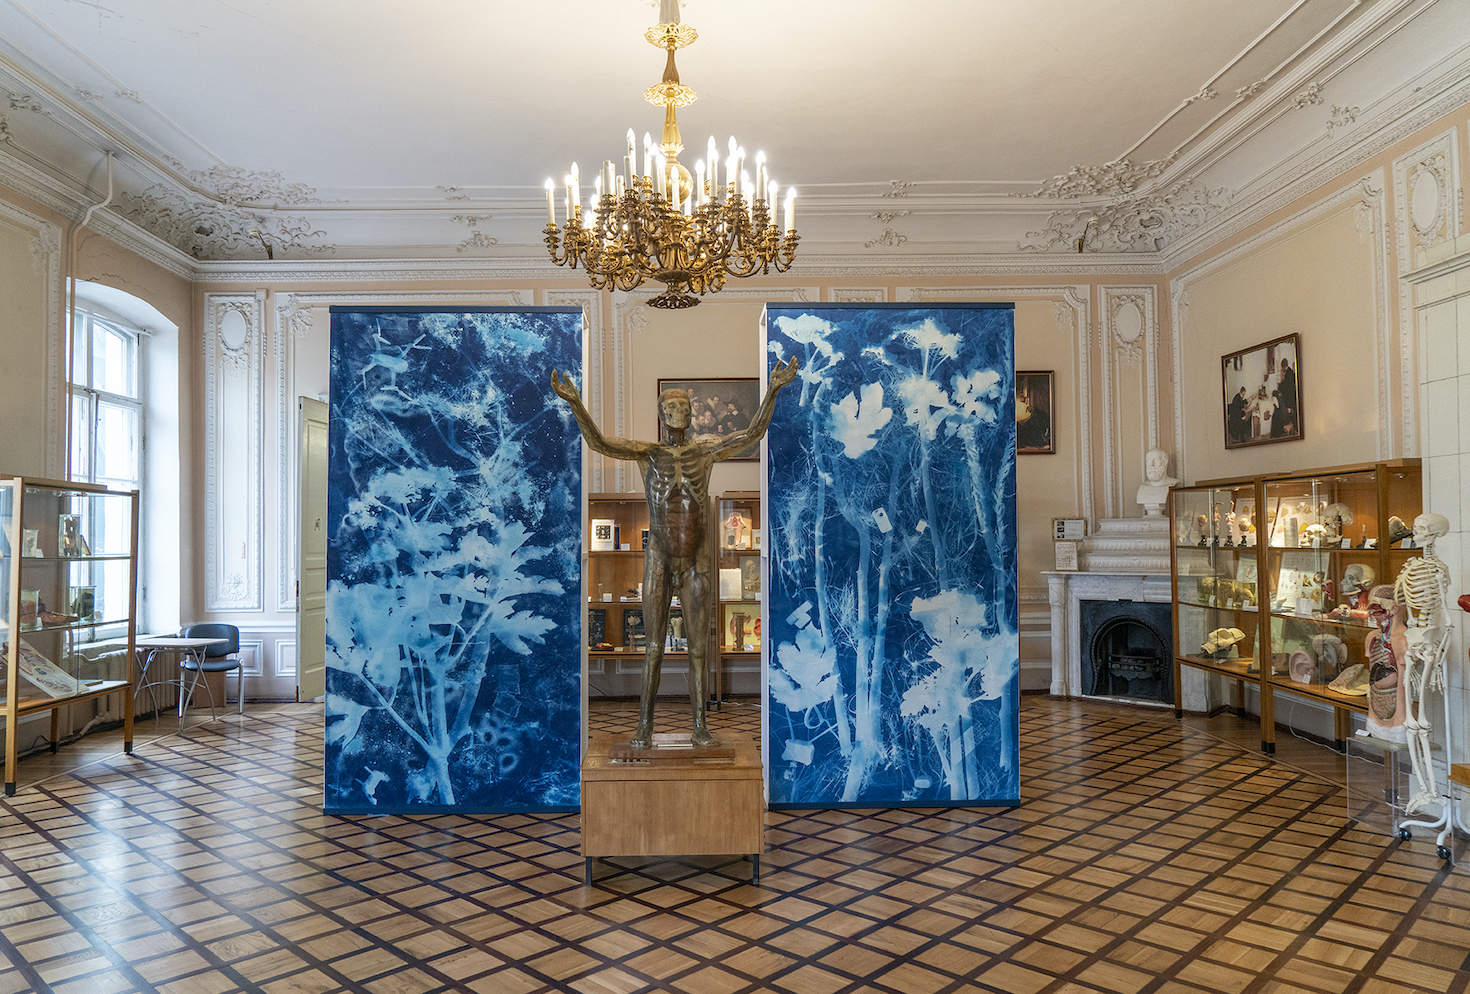 Soldiers of the Sun, or the Right to the Future Time, 2019. Museum of Hygiene, St Petersburg, Contemporary Art in Traditional Museum Festival. This site-specific installation subverts the anthropocentricism of the museum collection